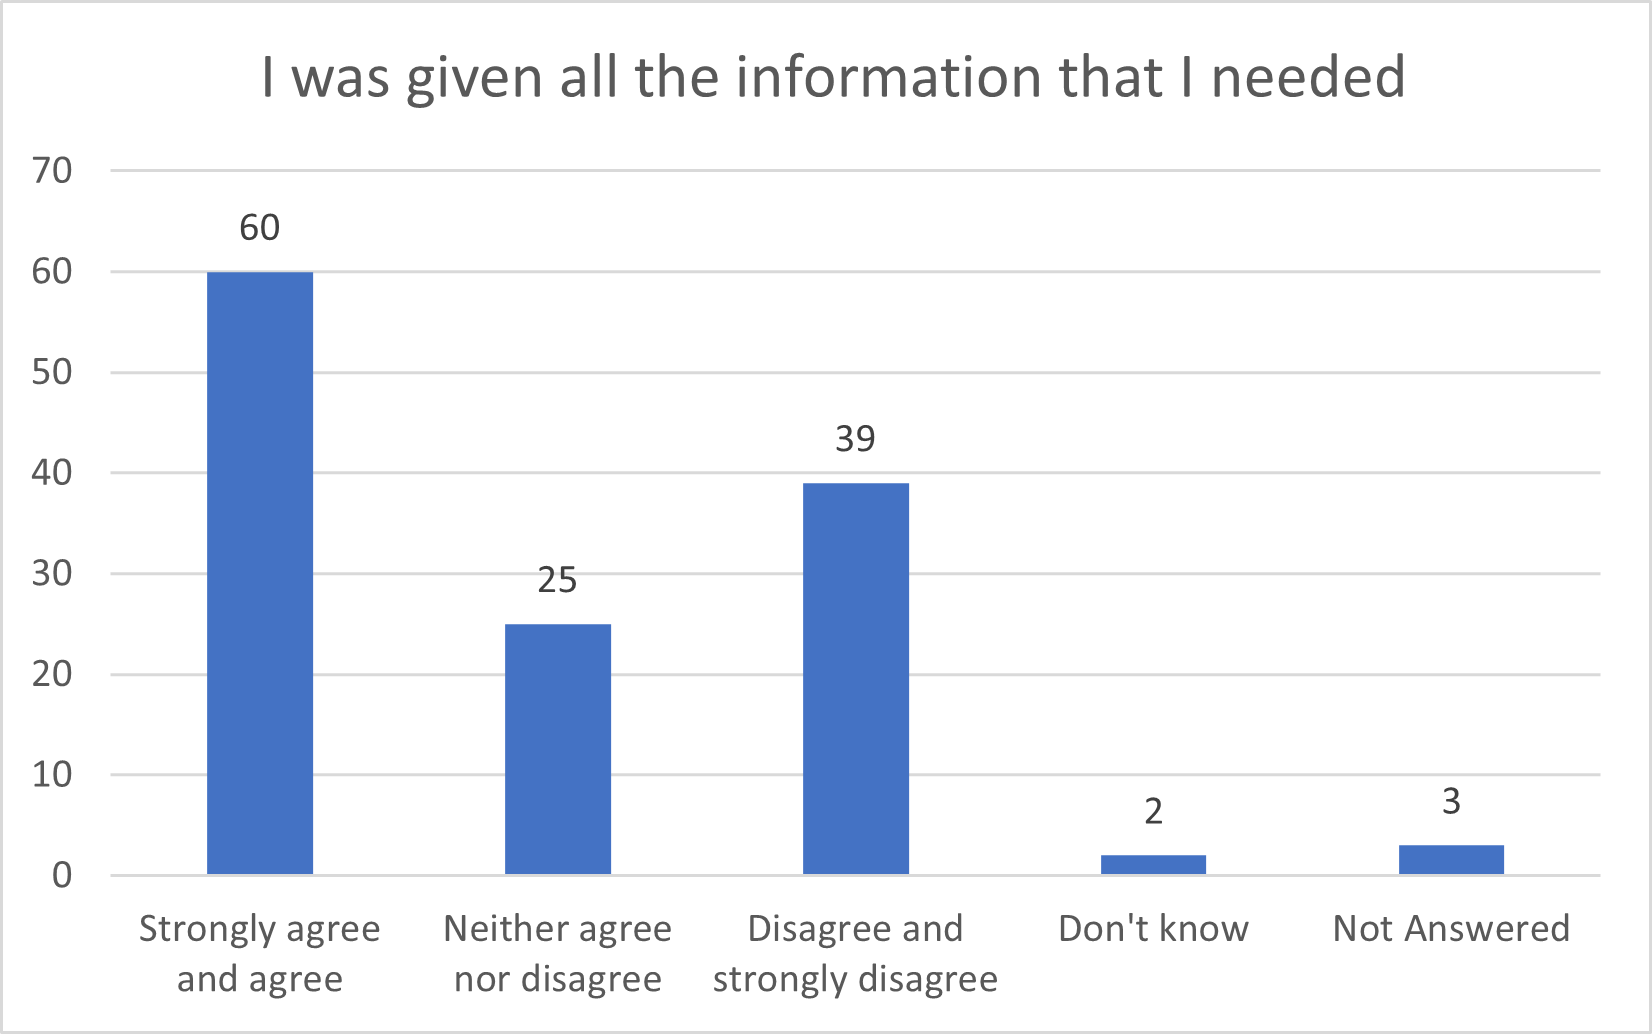 The bar chart showing attitude to whether given all information needed shows a slight majority between the two categories 'disagree and strongly disagree' and 'neither agree nor disagree'.